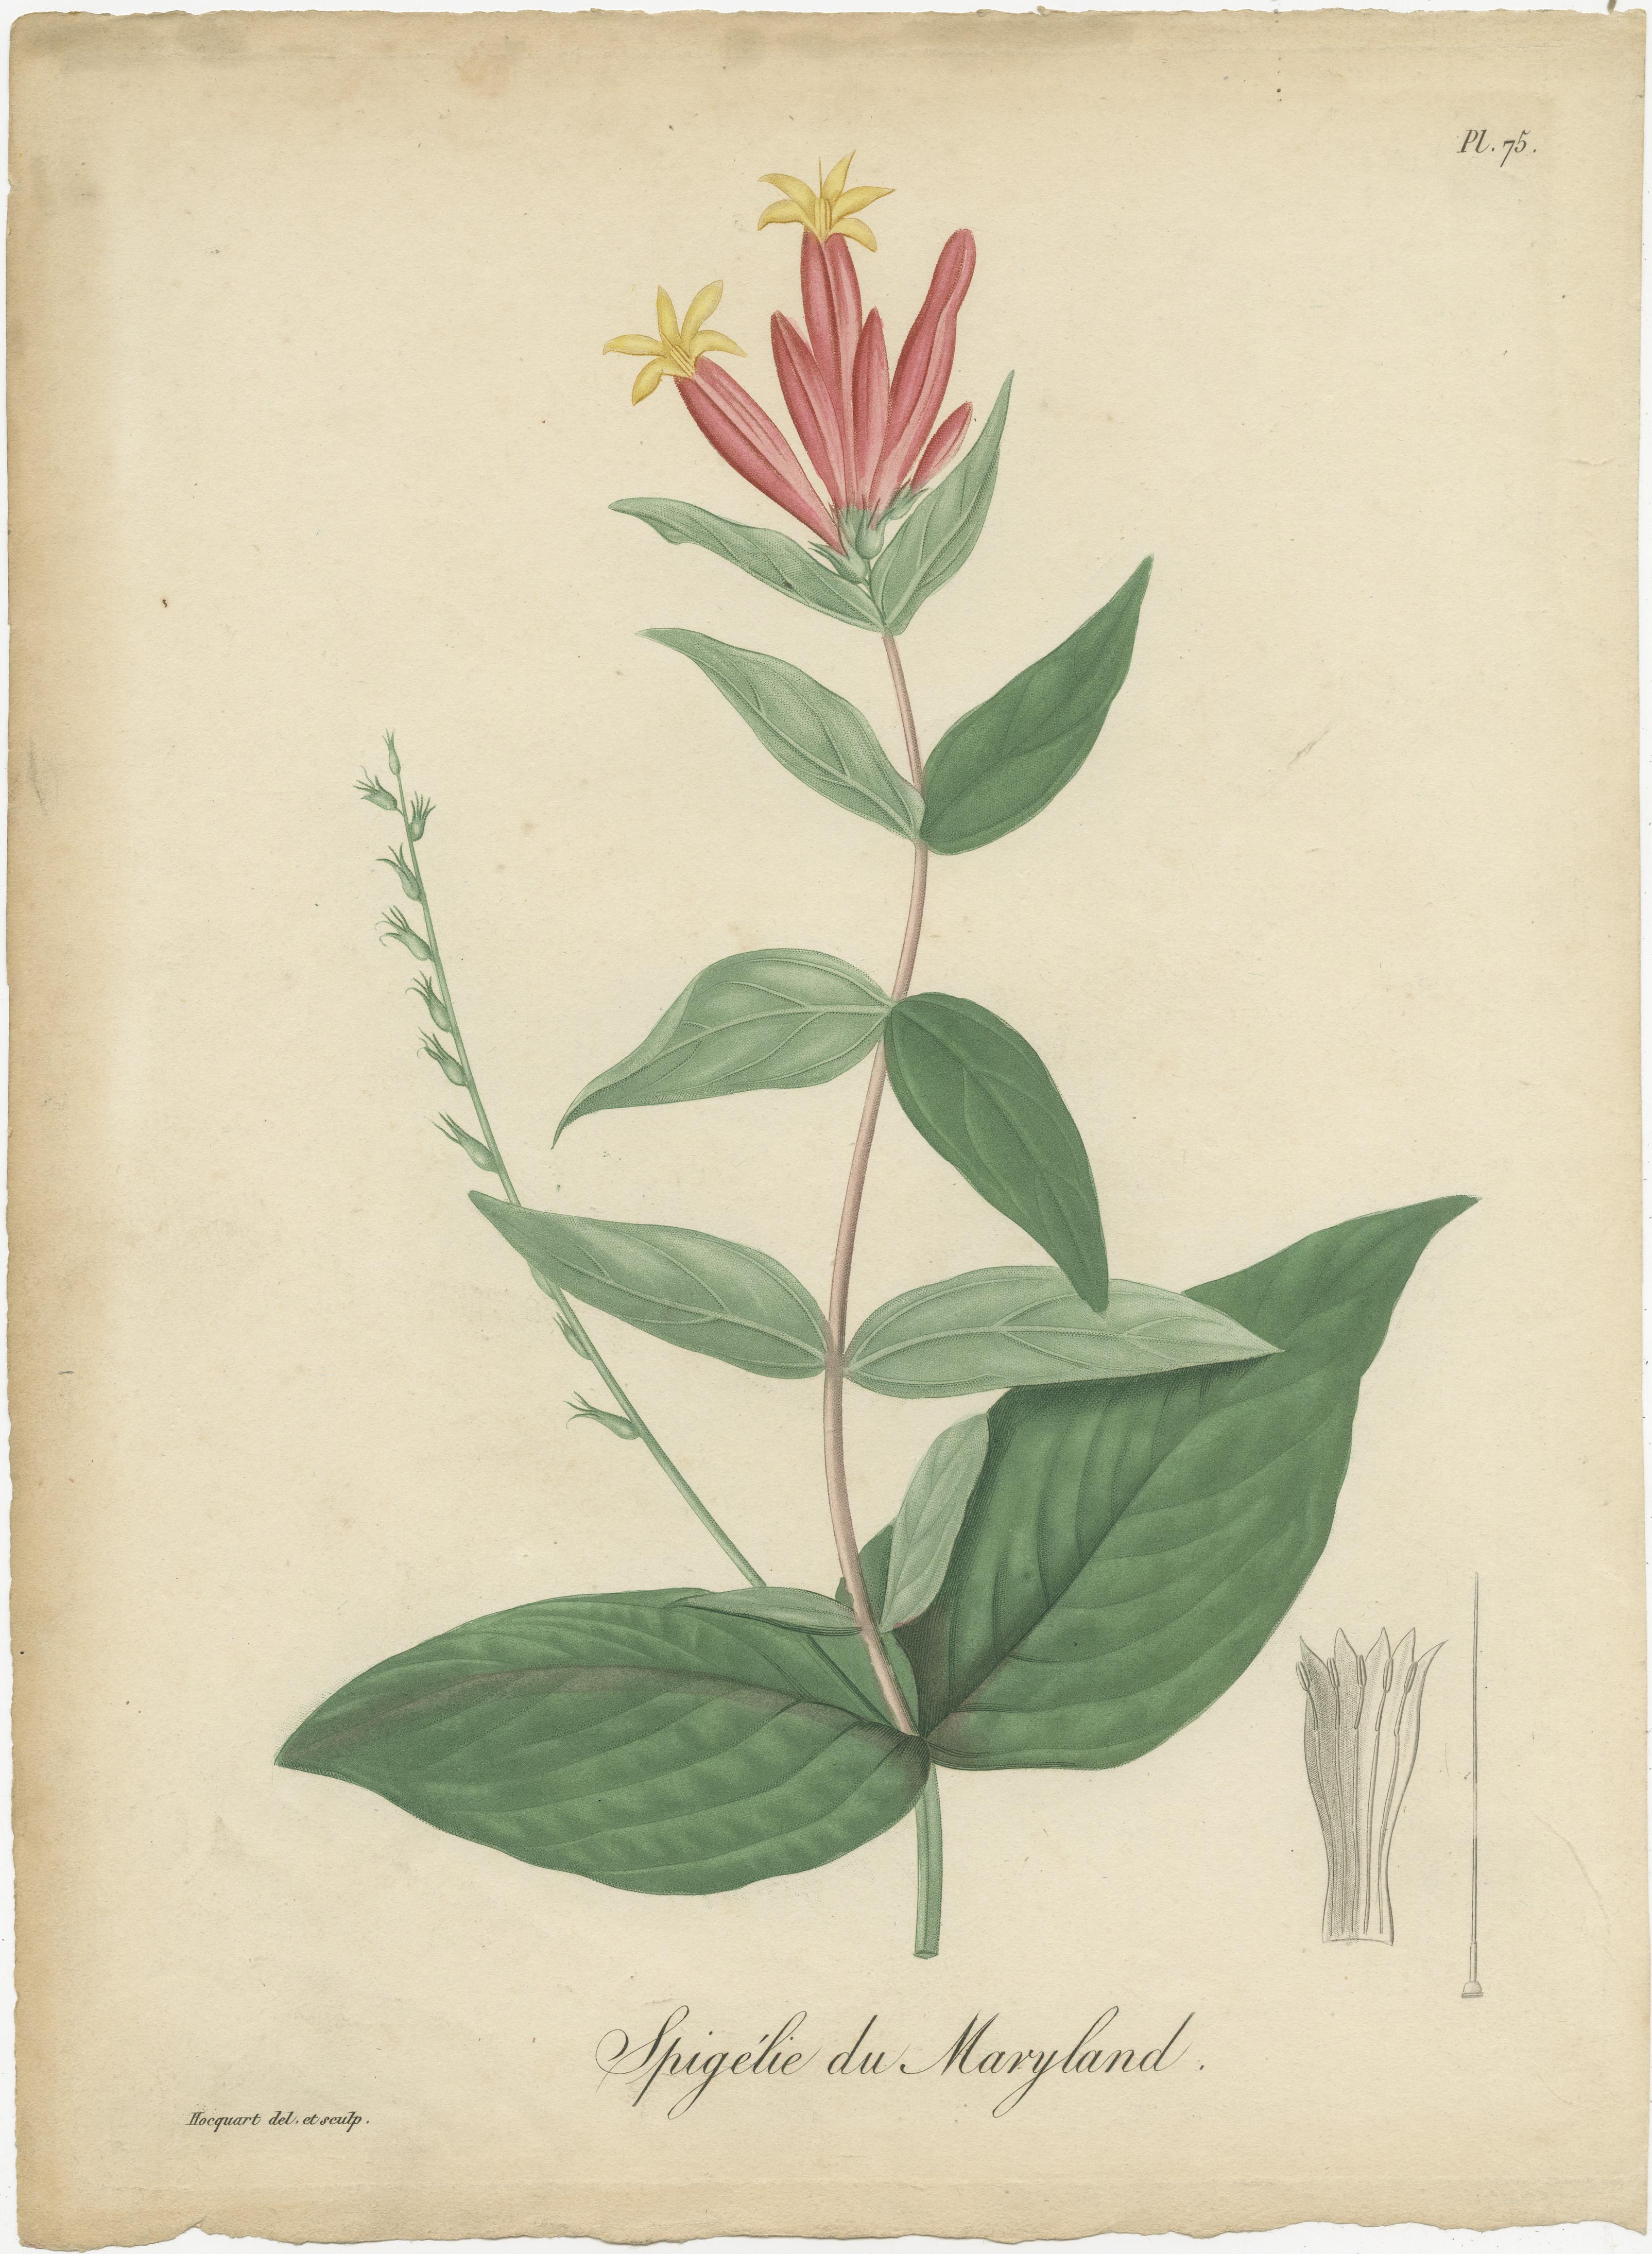 Antique botanical print titled 'MSpigélie du Maryland'. This print shows the Spigelia Marilandica, also known as the Indian pink or woodland pinkroot. It is a herbacious perennial wildflower in the Loganiaceae family native to inland areas of the